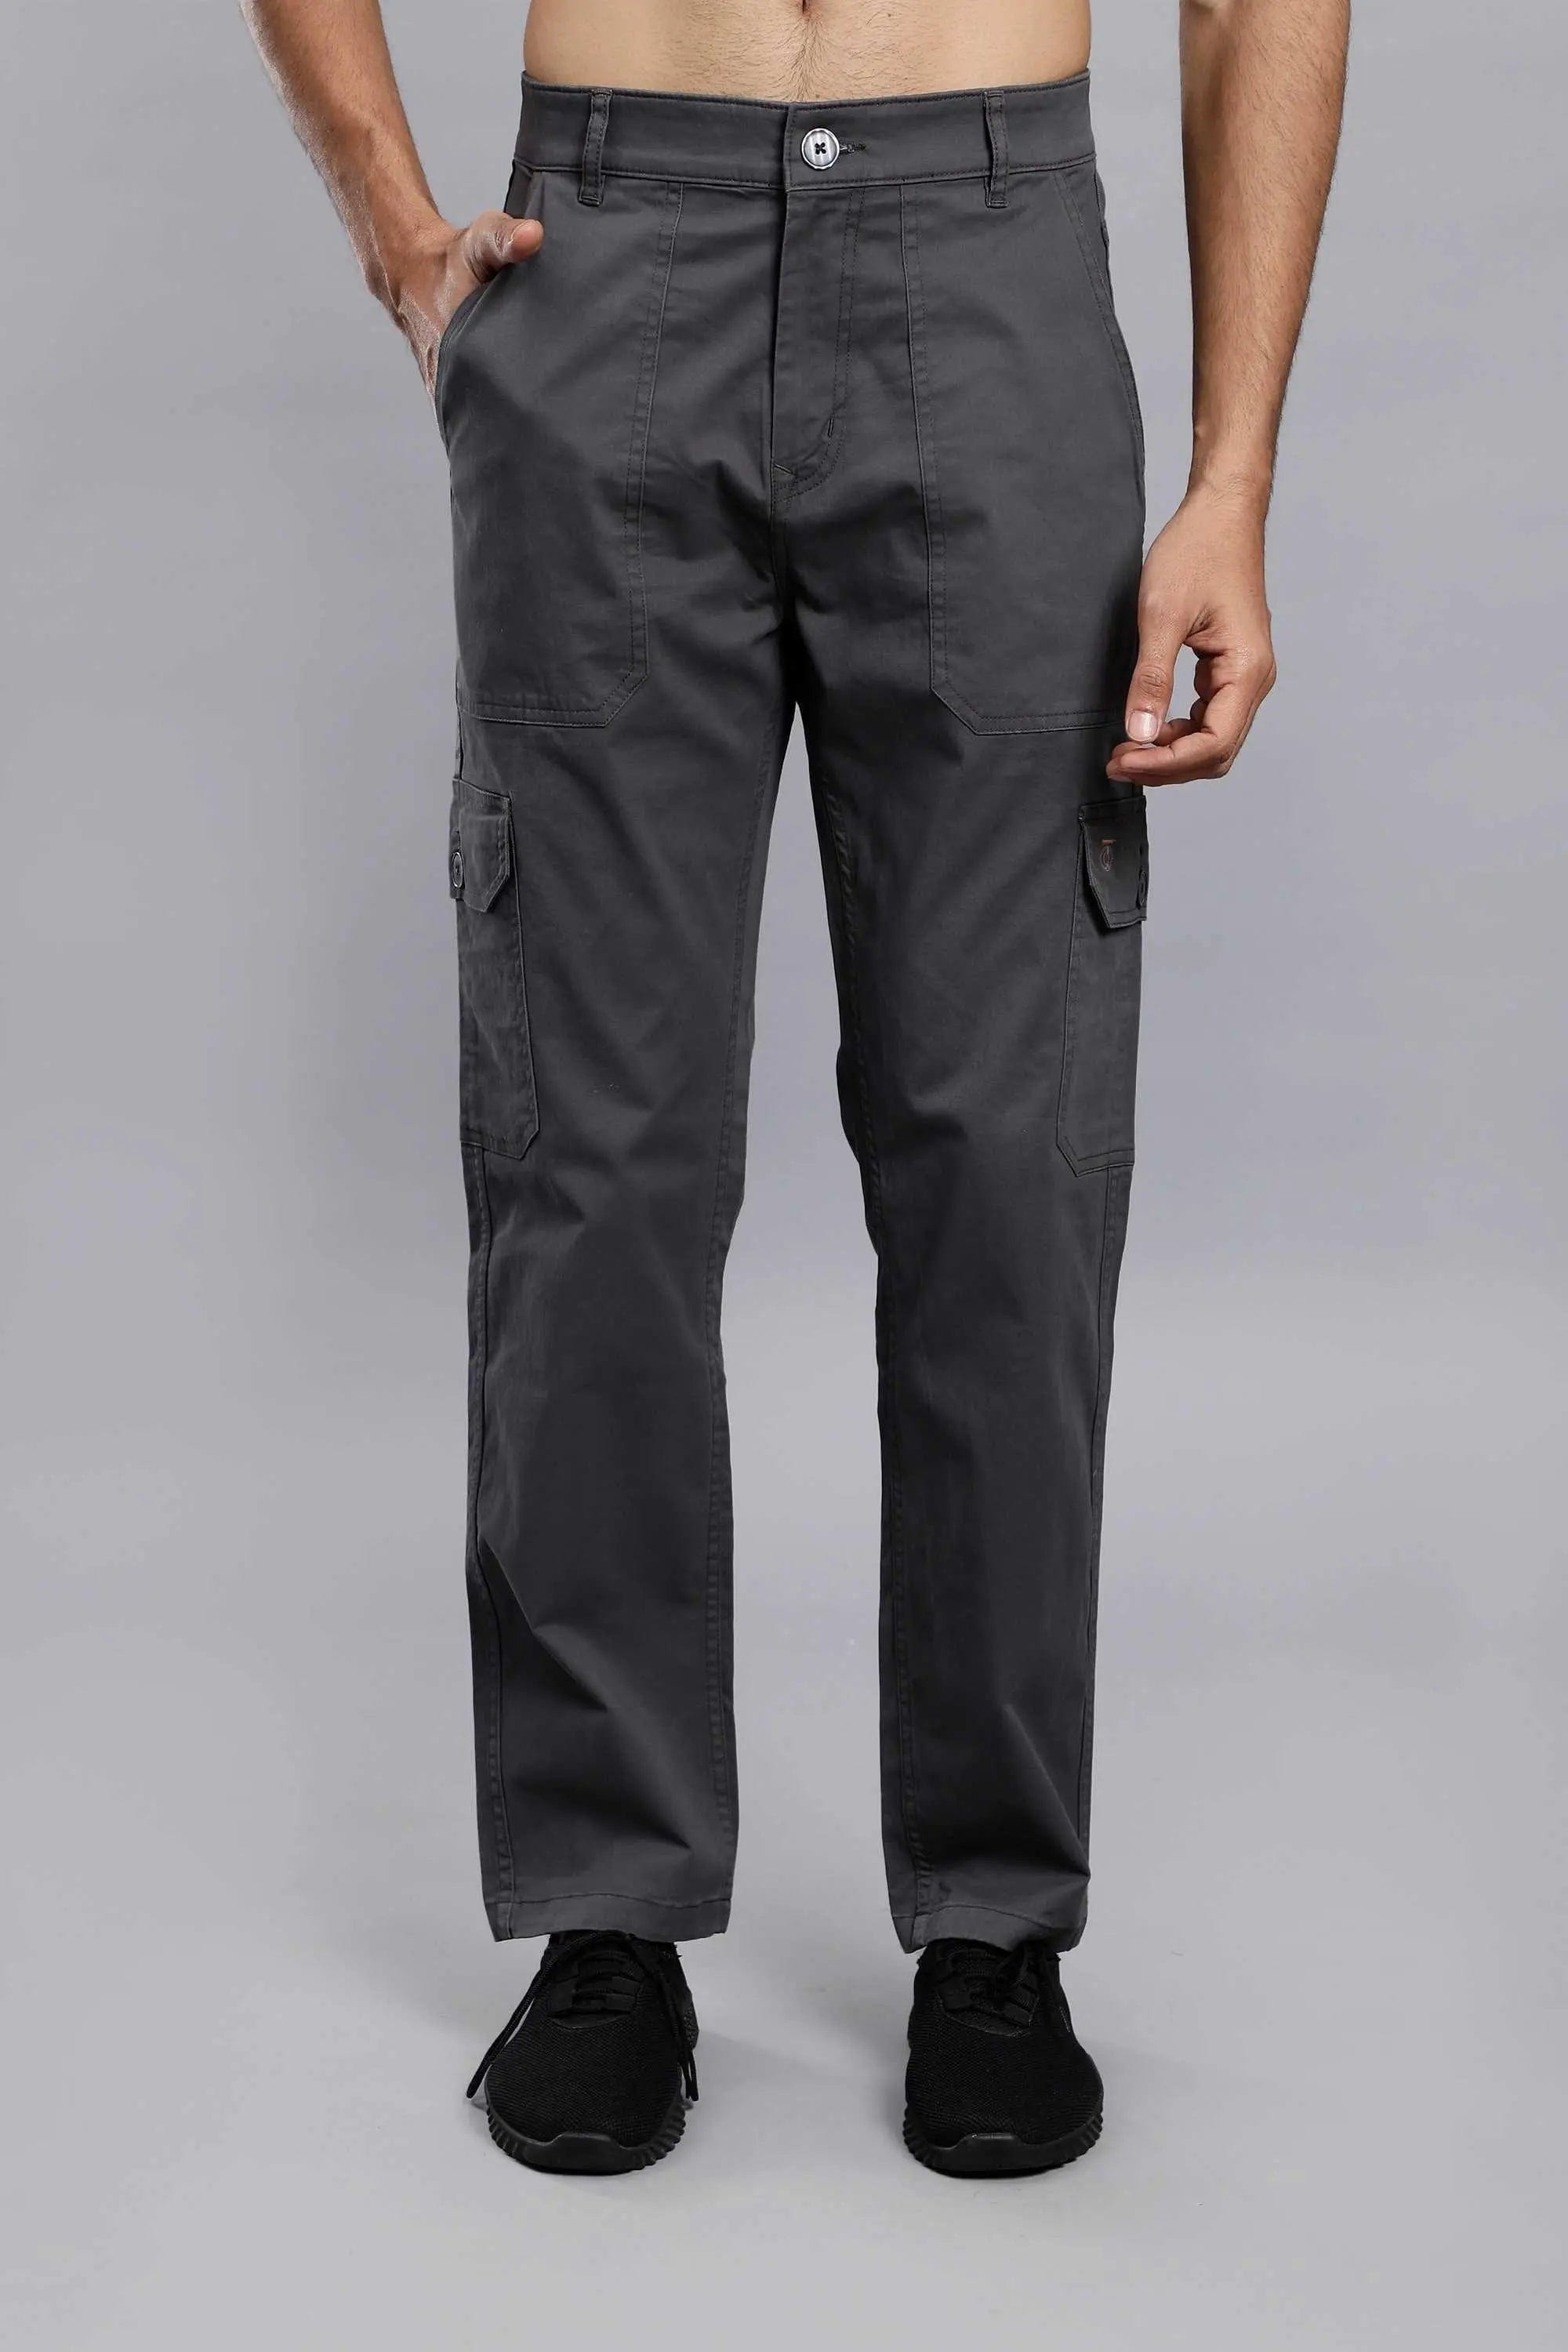 jsaierl Cargo Pants for Men Straight Leg Loose Fit India | Ubuy